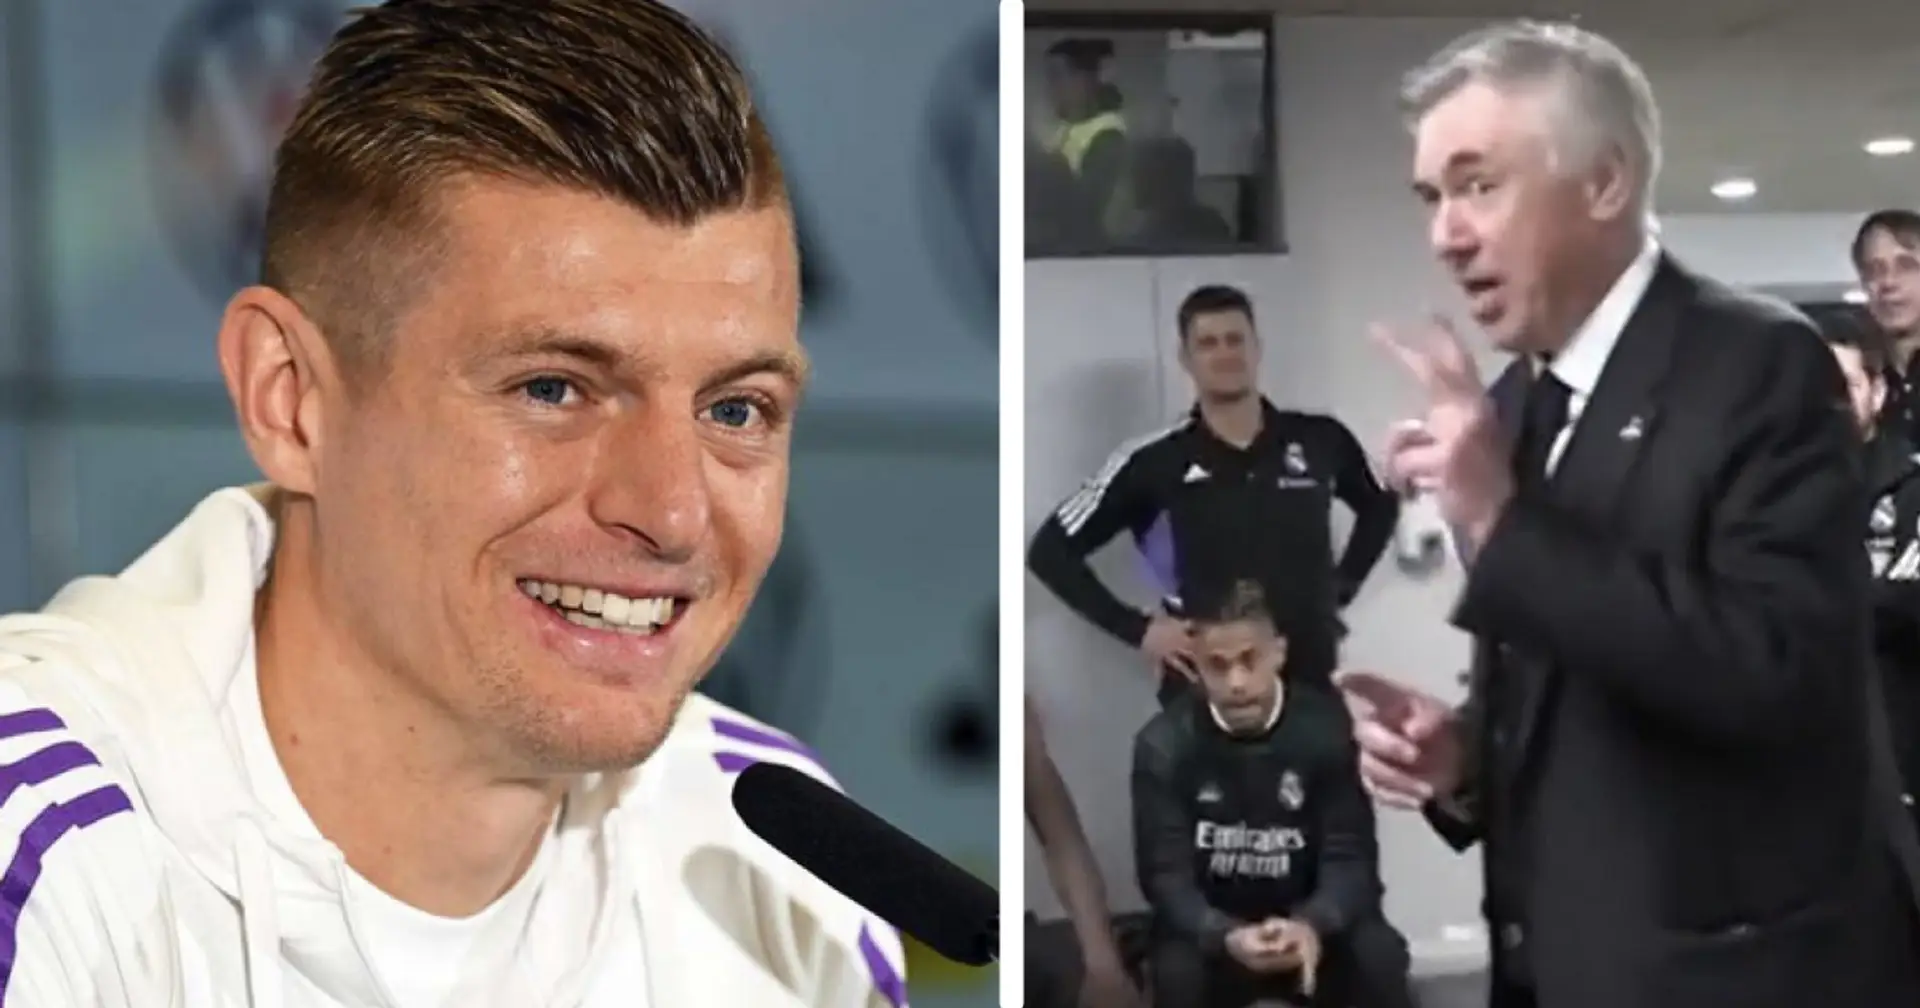 'He said he lied to us': Toni Kroos reveals what Carlo Ancelotti told players ahead of El Clasico